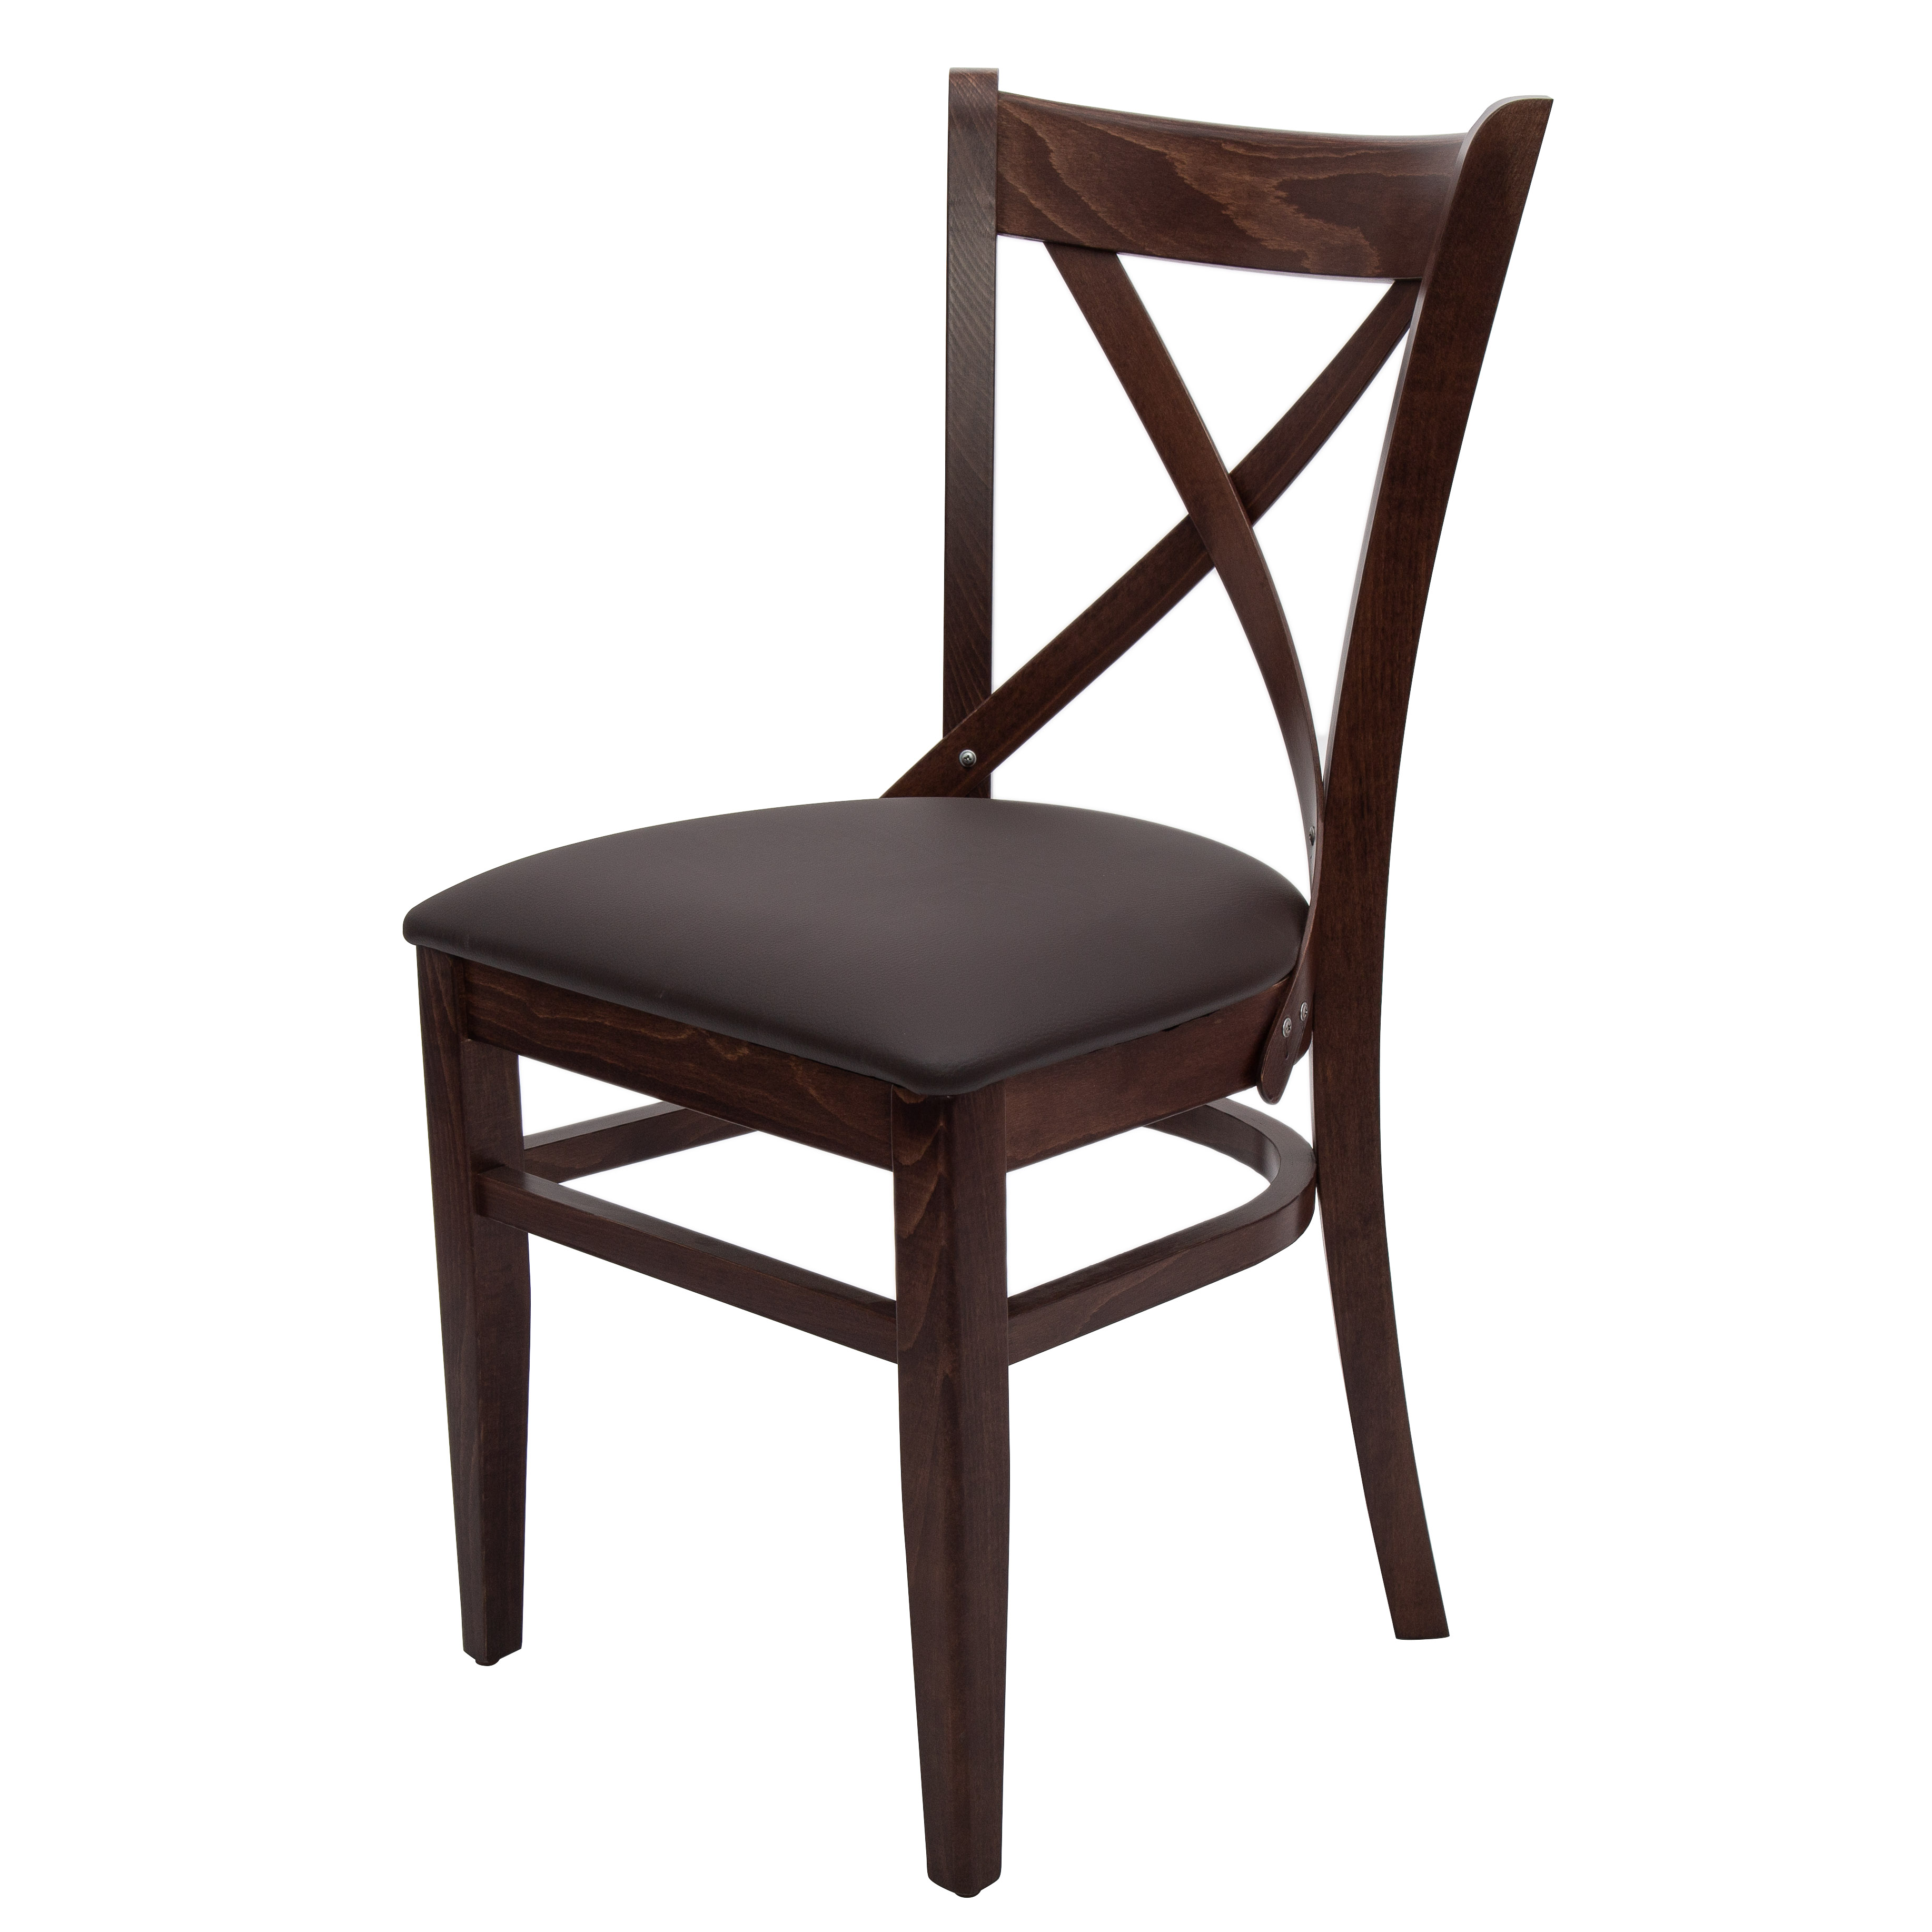 RESTAURANT CHAIRS CROSSBACK WITH BROWN SEAT CUSHION 2137